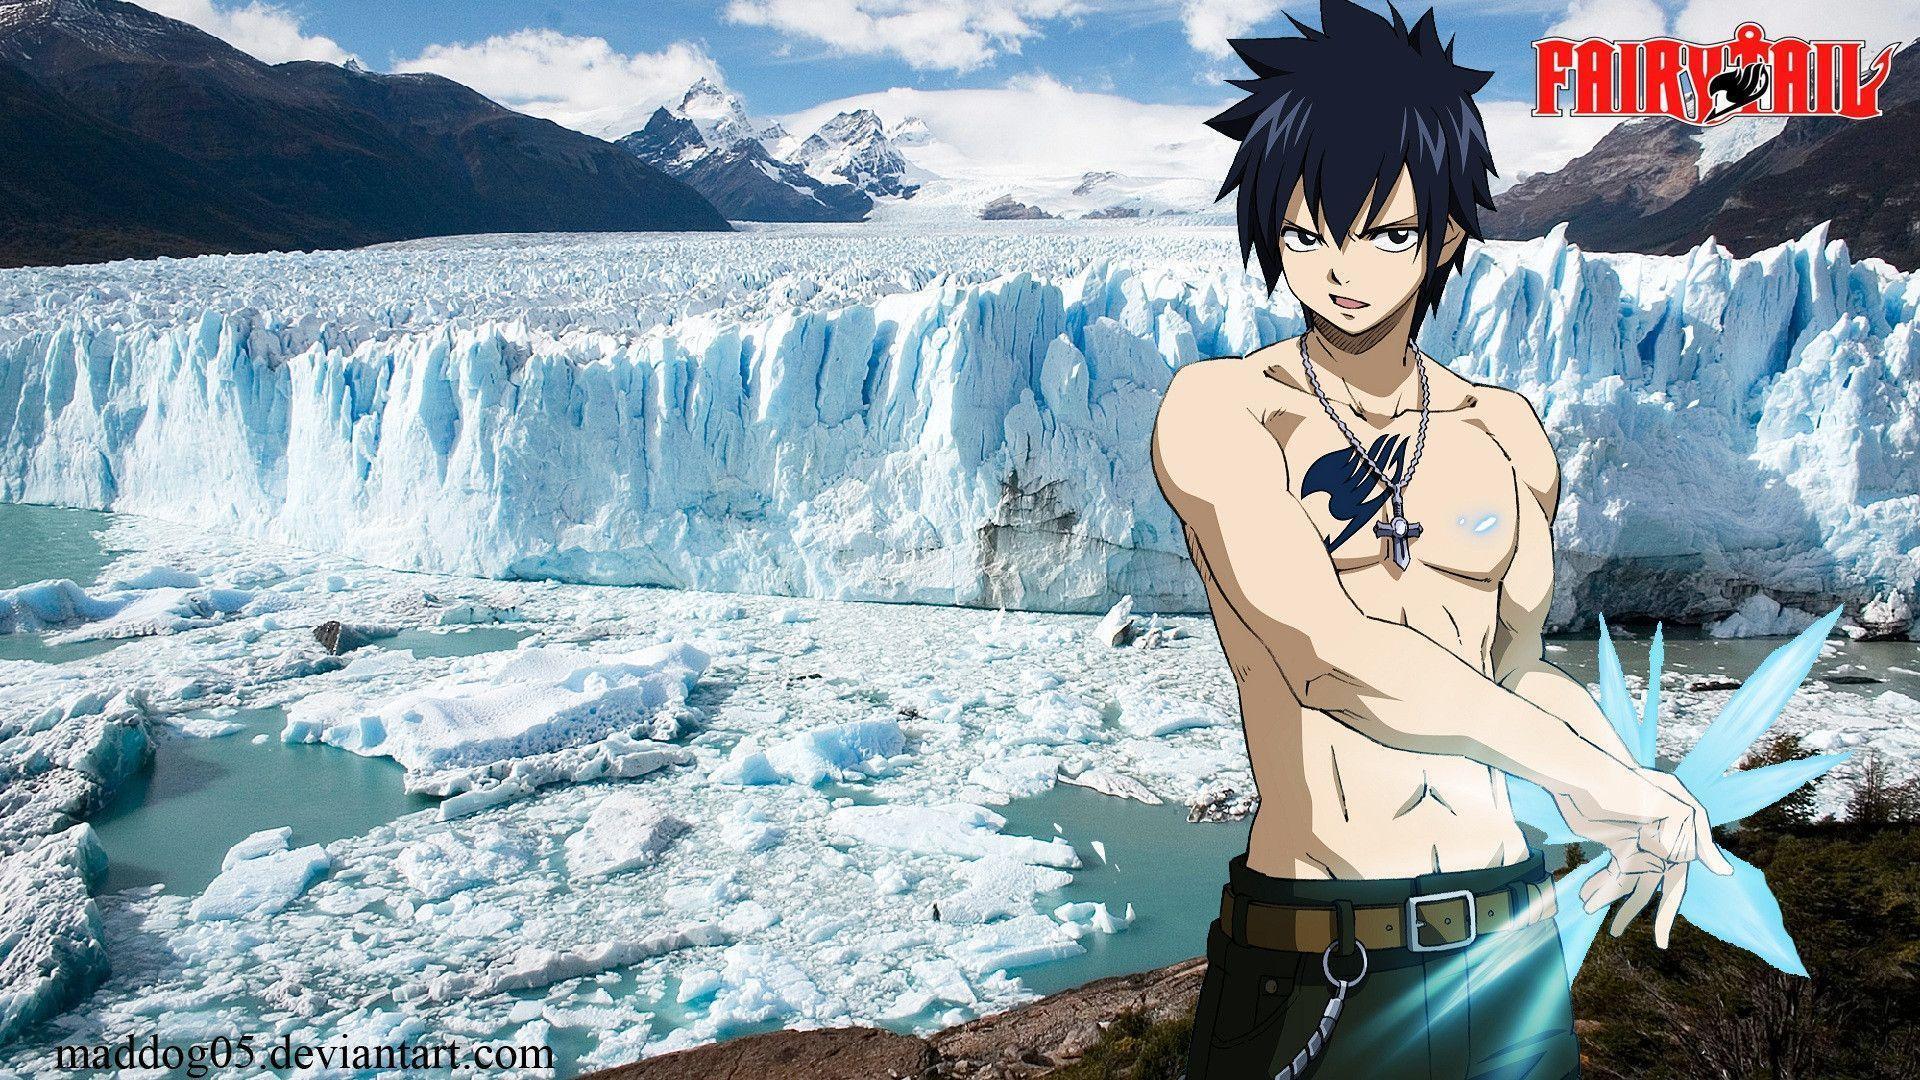 Fairy Tail Guild Of Magnolia image Gray Fullbuster HD wallpaper